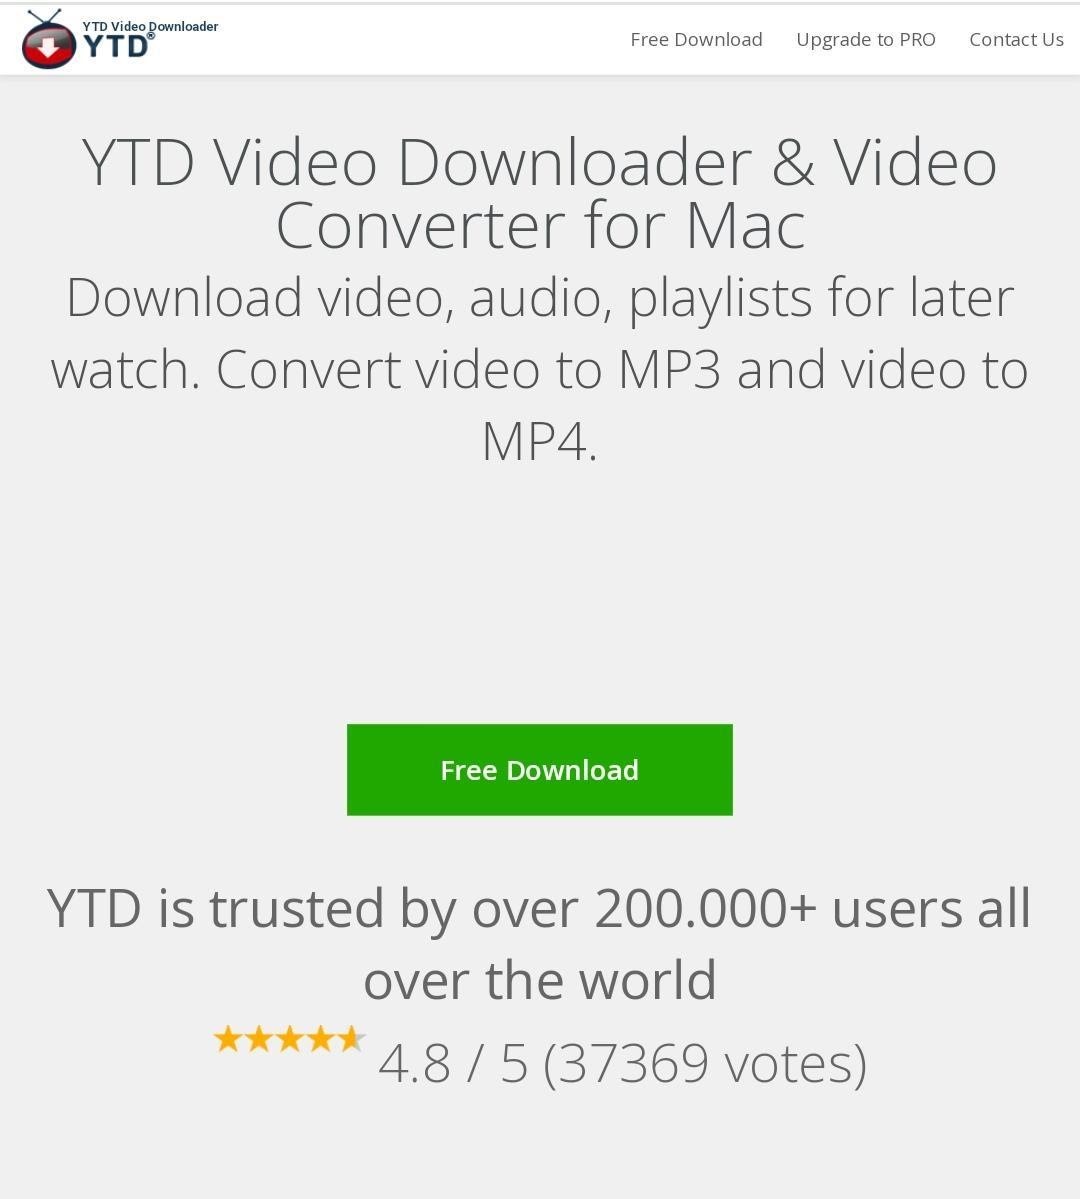 youtube mp3 conconventer free download